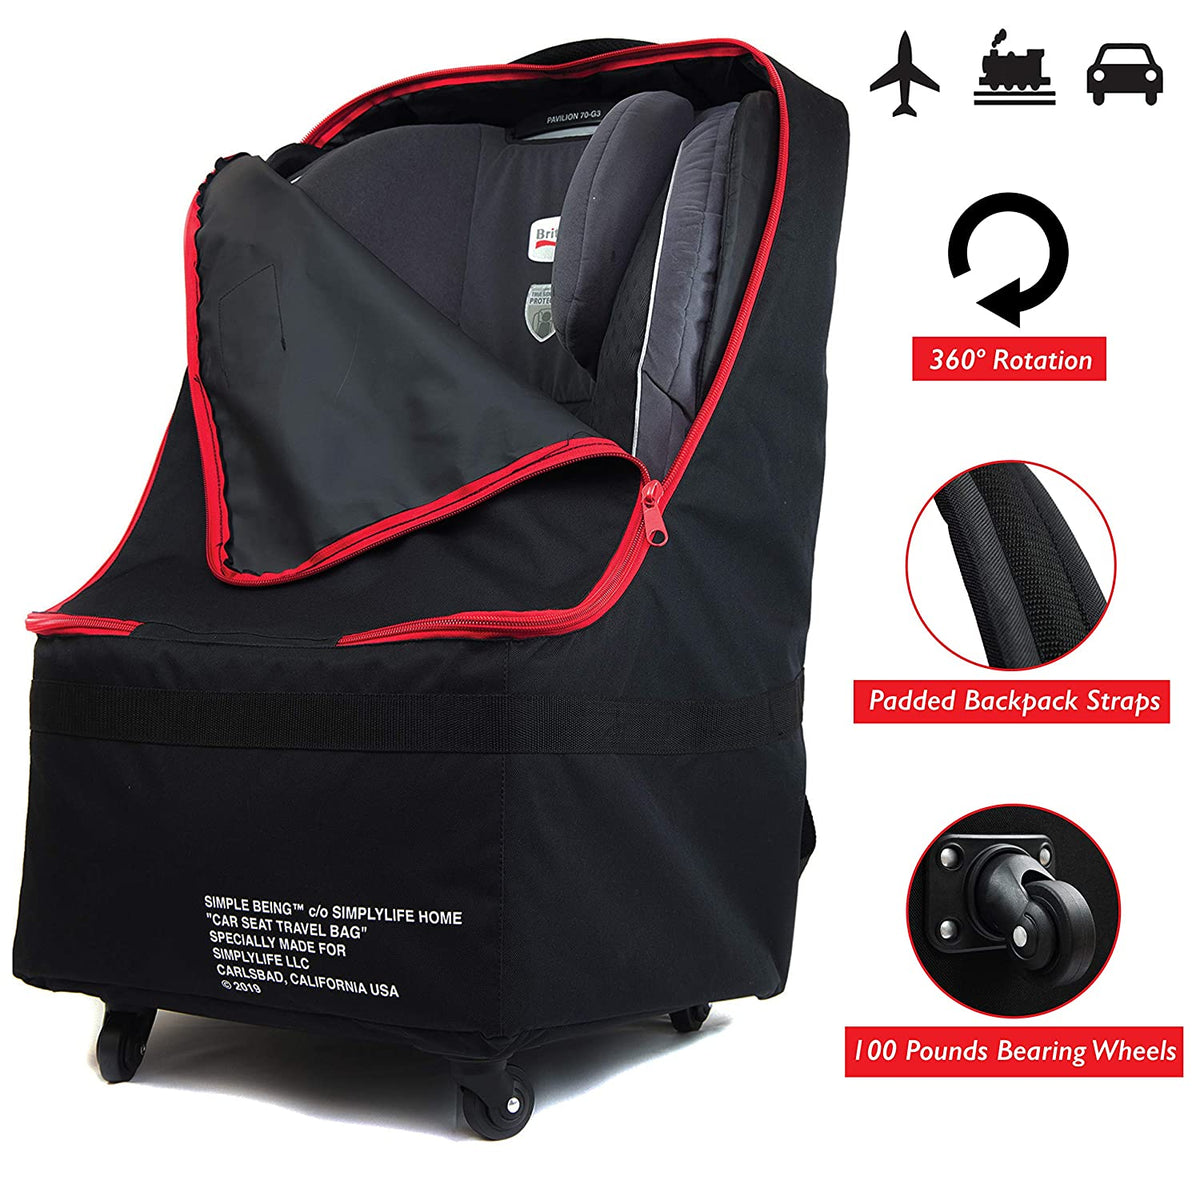  Simple Being Baby Car Seat Travel Bag, Gate Check